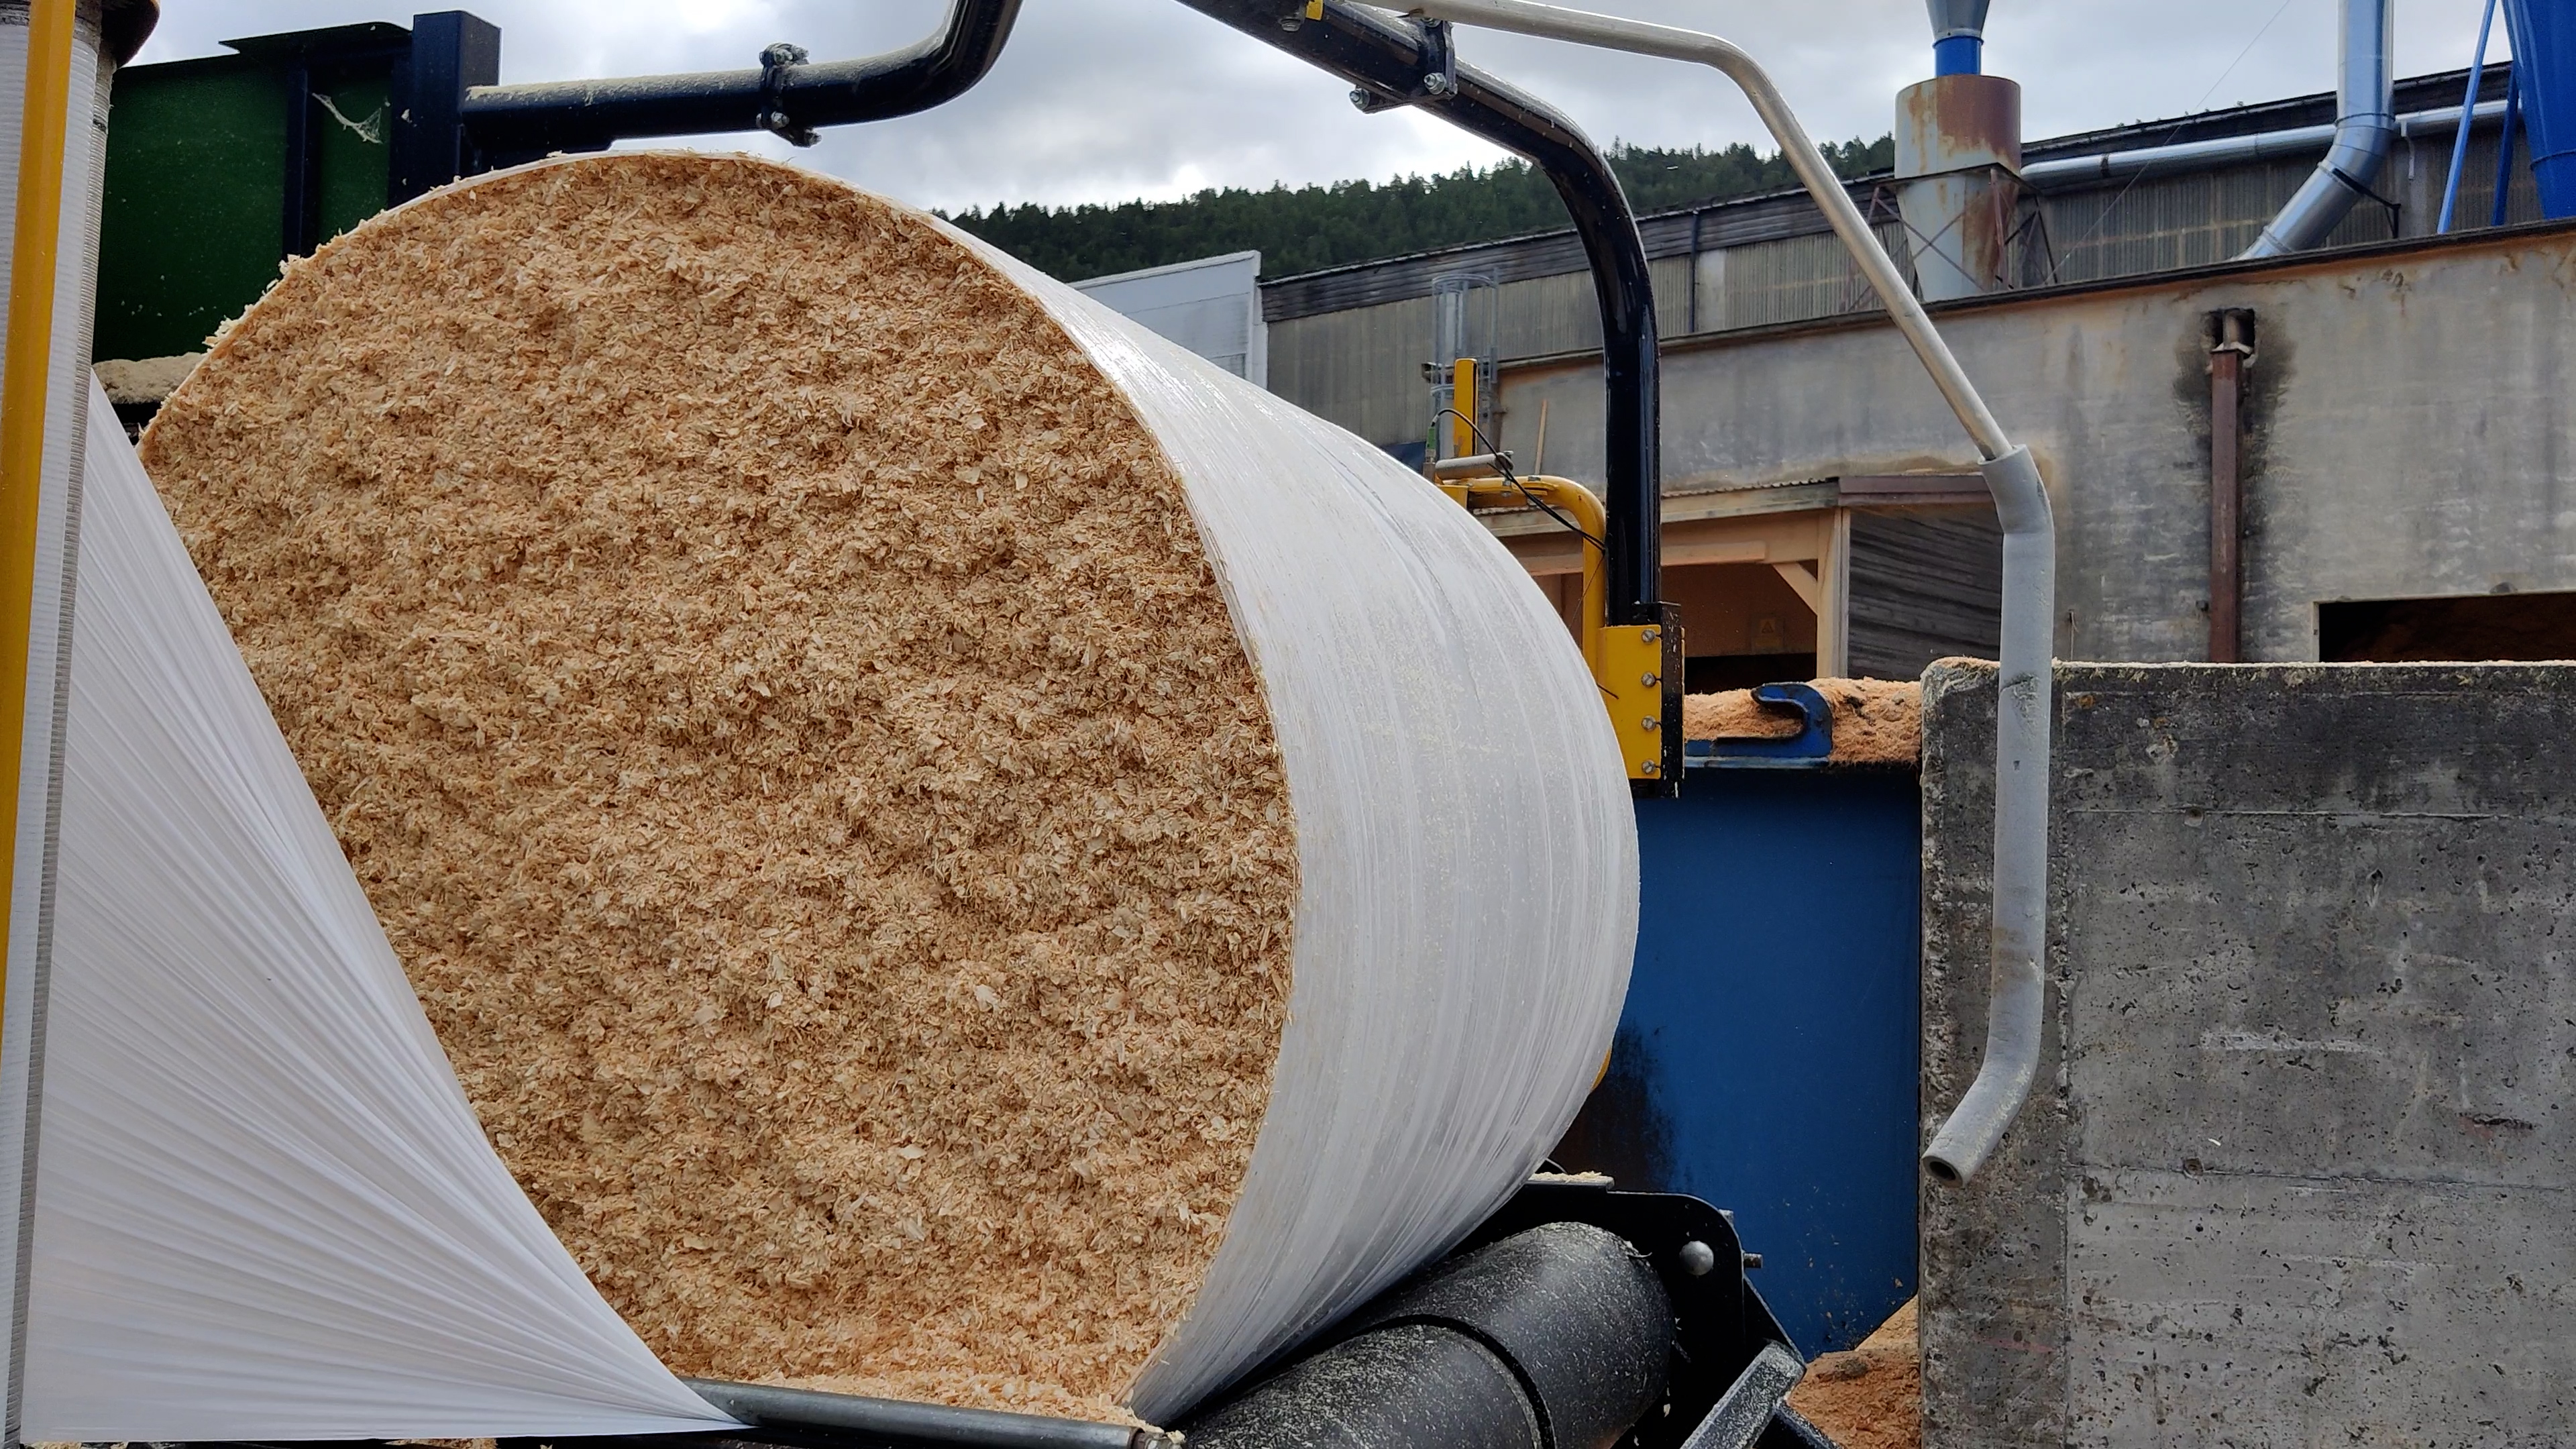 A half-wrapped wood shavings bale with the bale sides still exposing the yellow material.